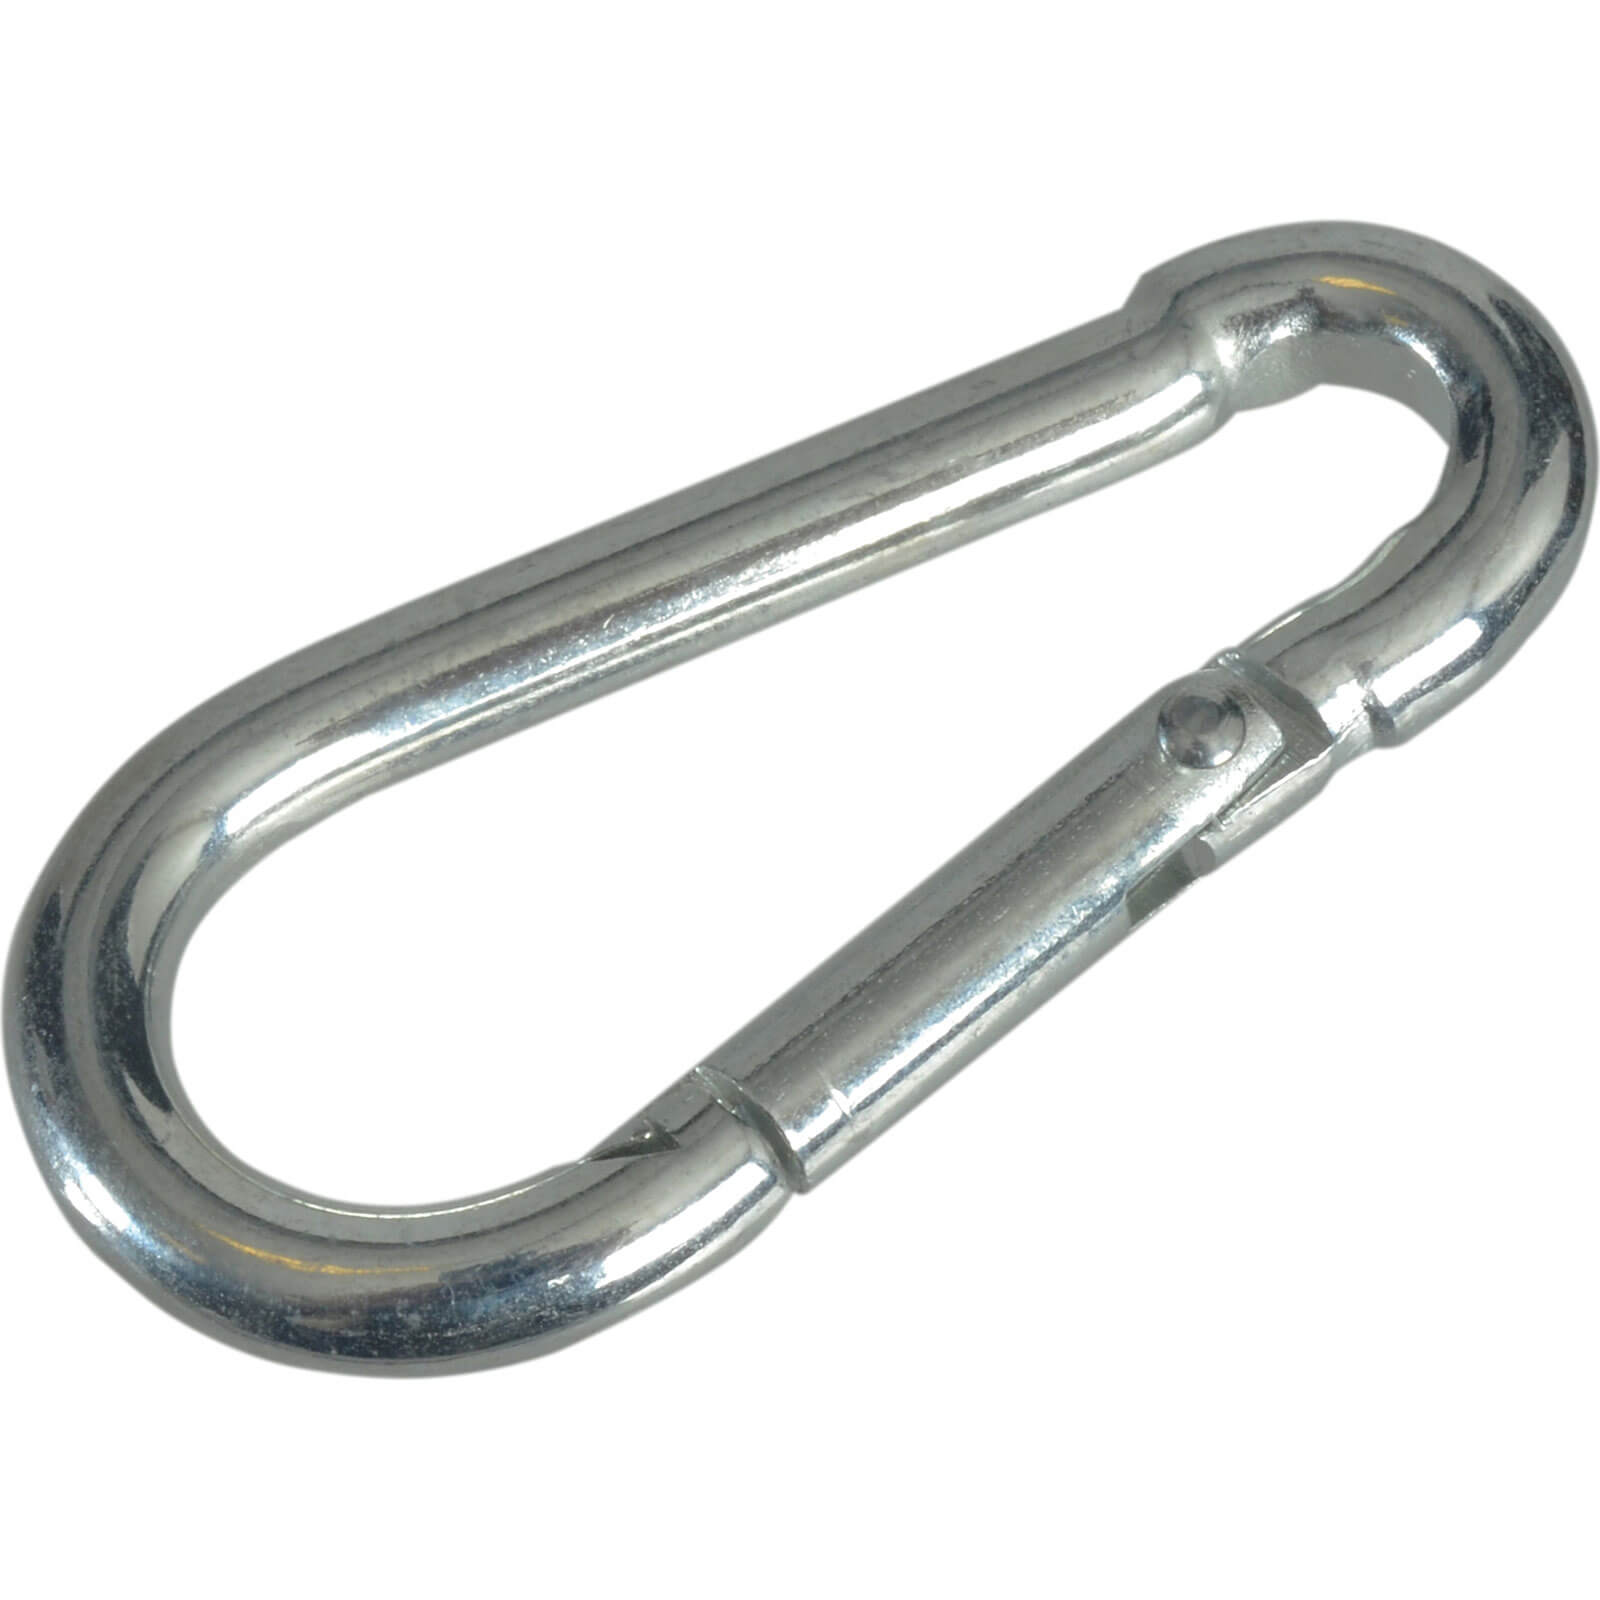 Image of Faithfull Zinc Plated Fire Brigade Snap Hook Carabiner 4mm Pack of 4